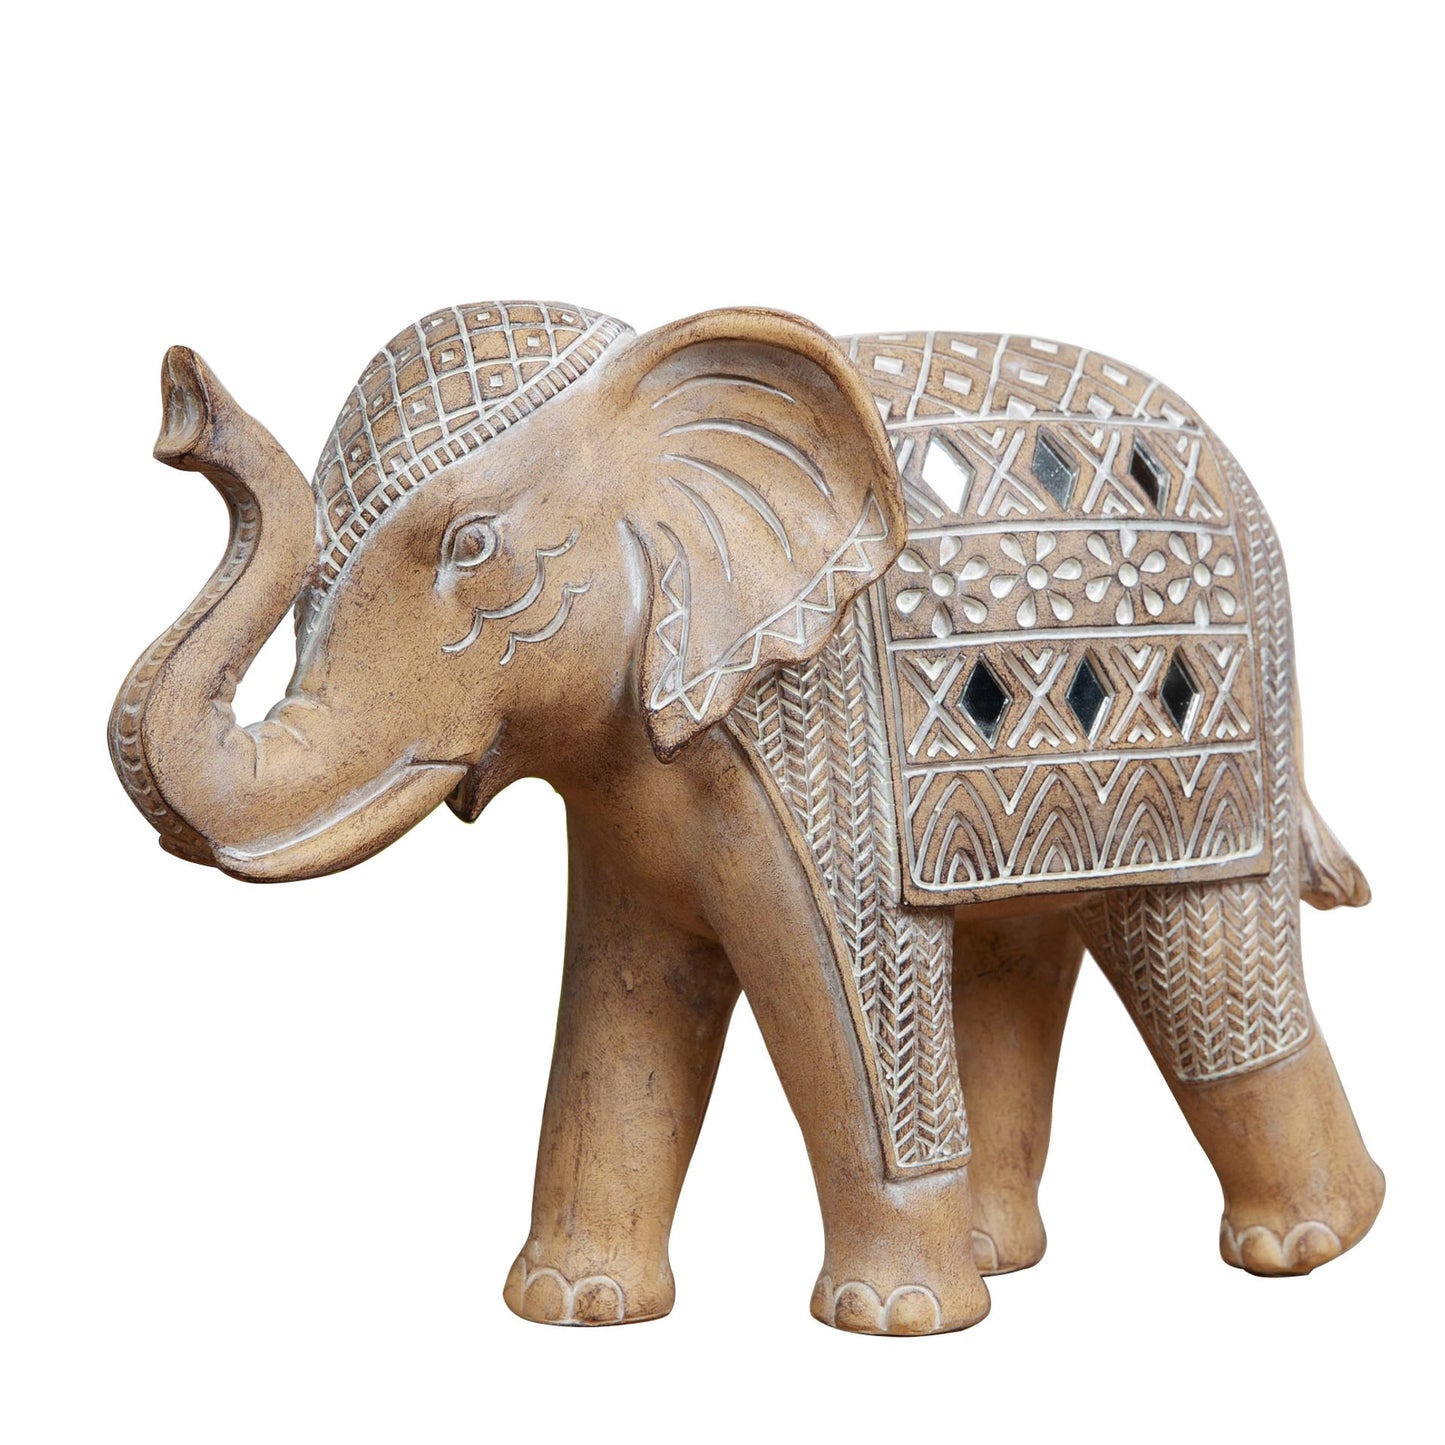 EMBOSSED ELEPHANT WITH MIRROR DETAIL FIGURINE 16.5CM